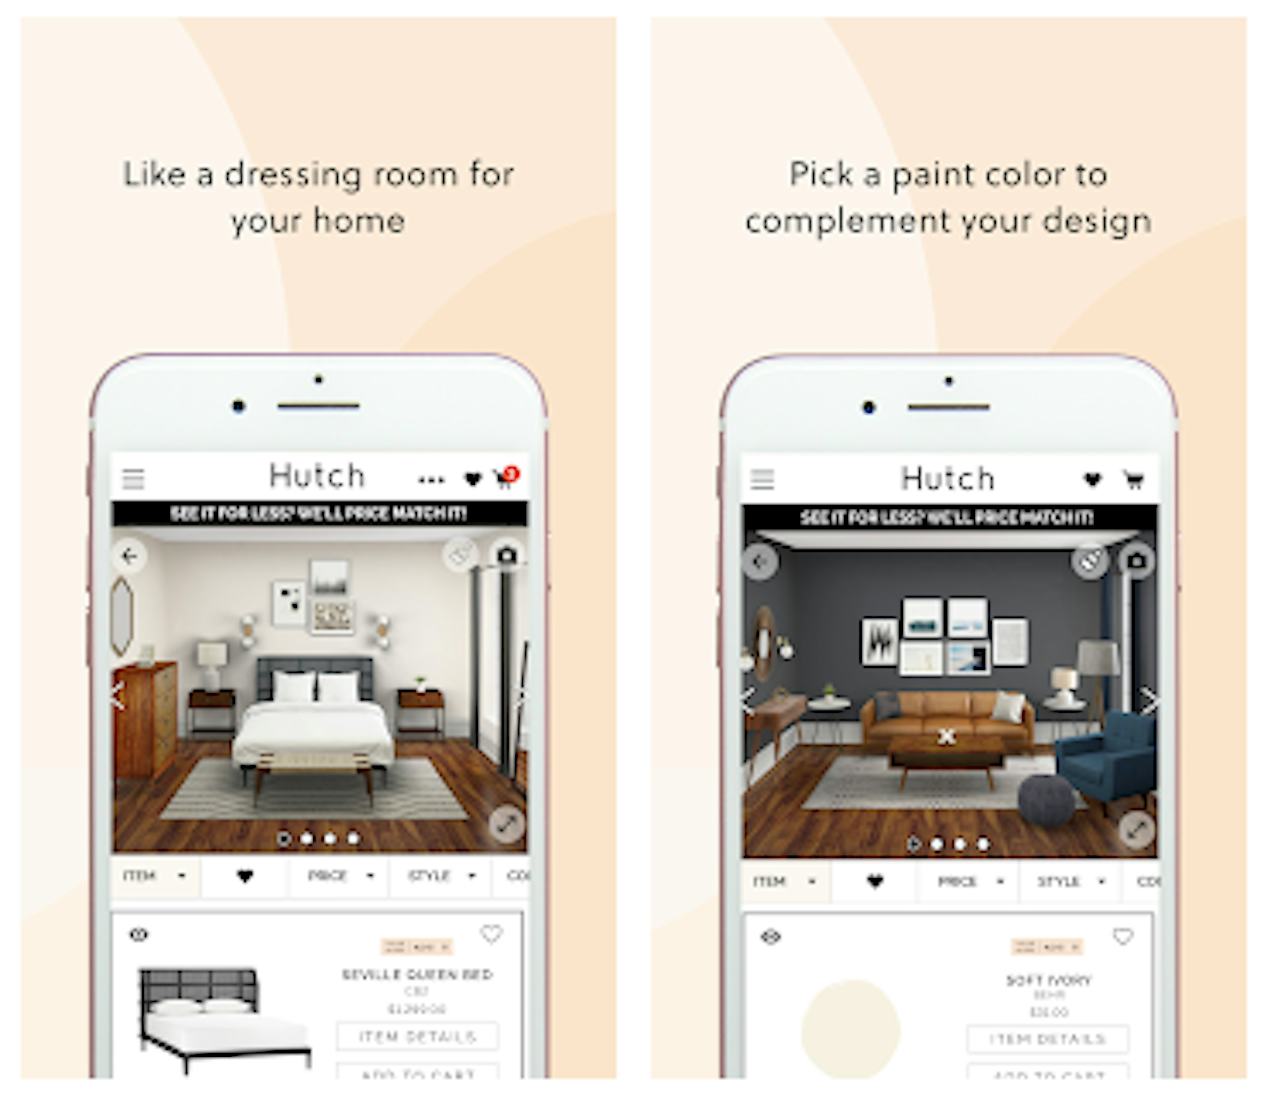 12 Home Design Apps To Help You With Redecorating Your Space Easily